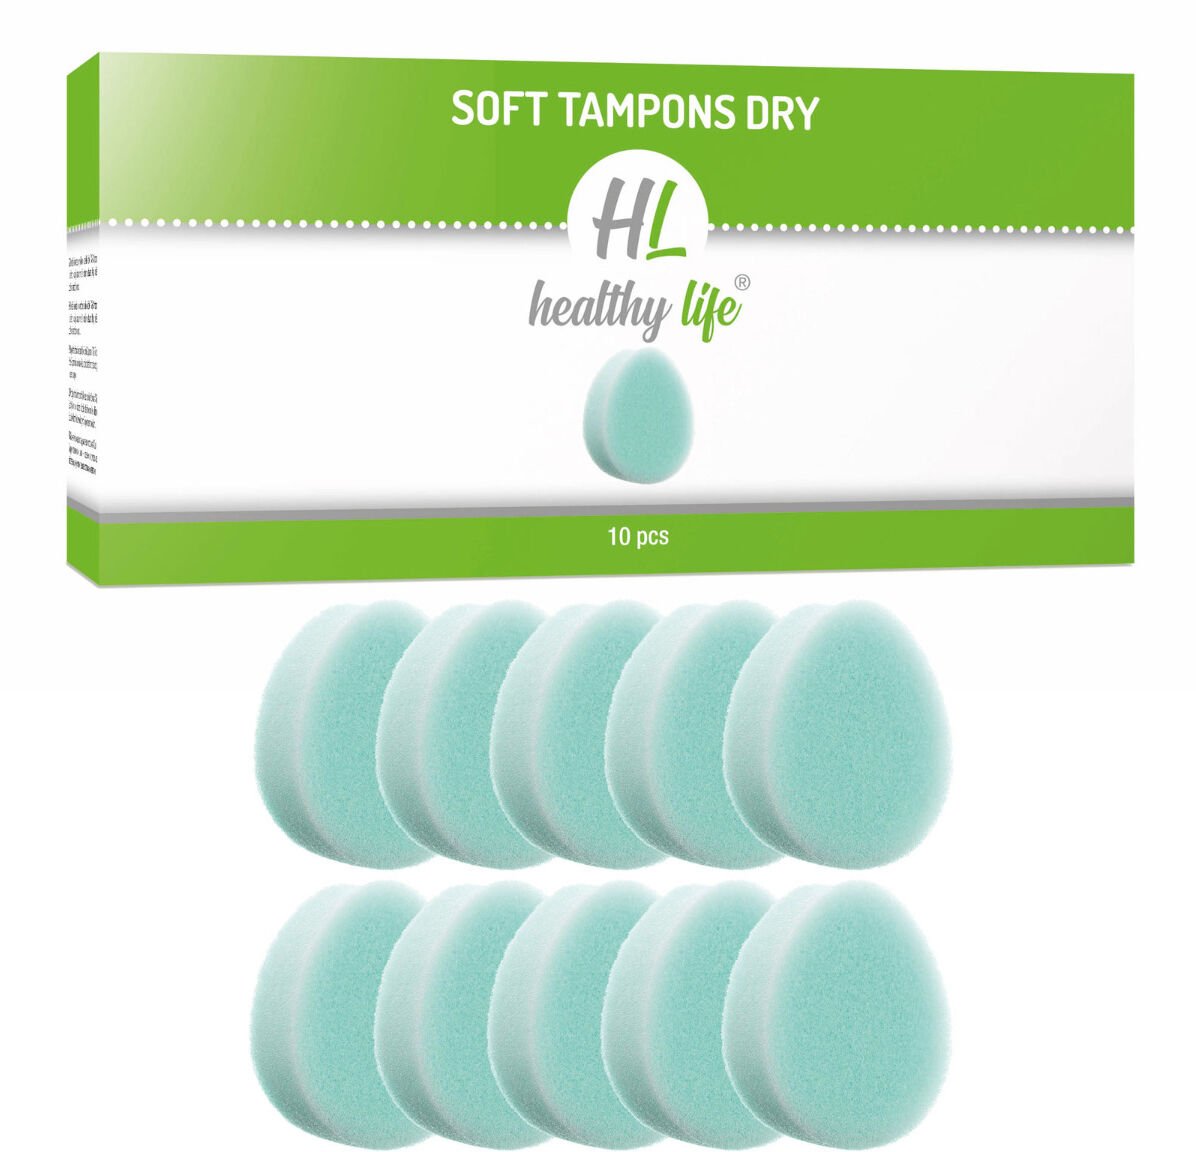 Healthy Life - Tampón Soft Dry maxi pack